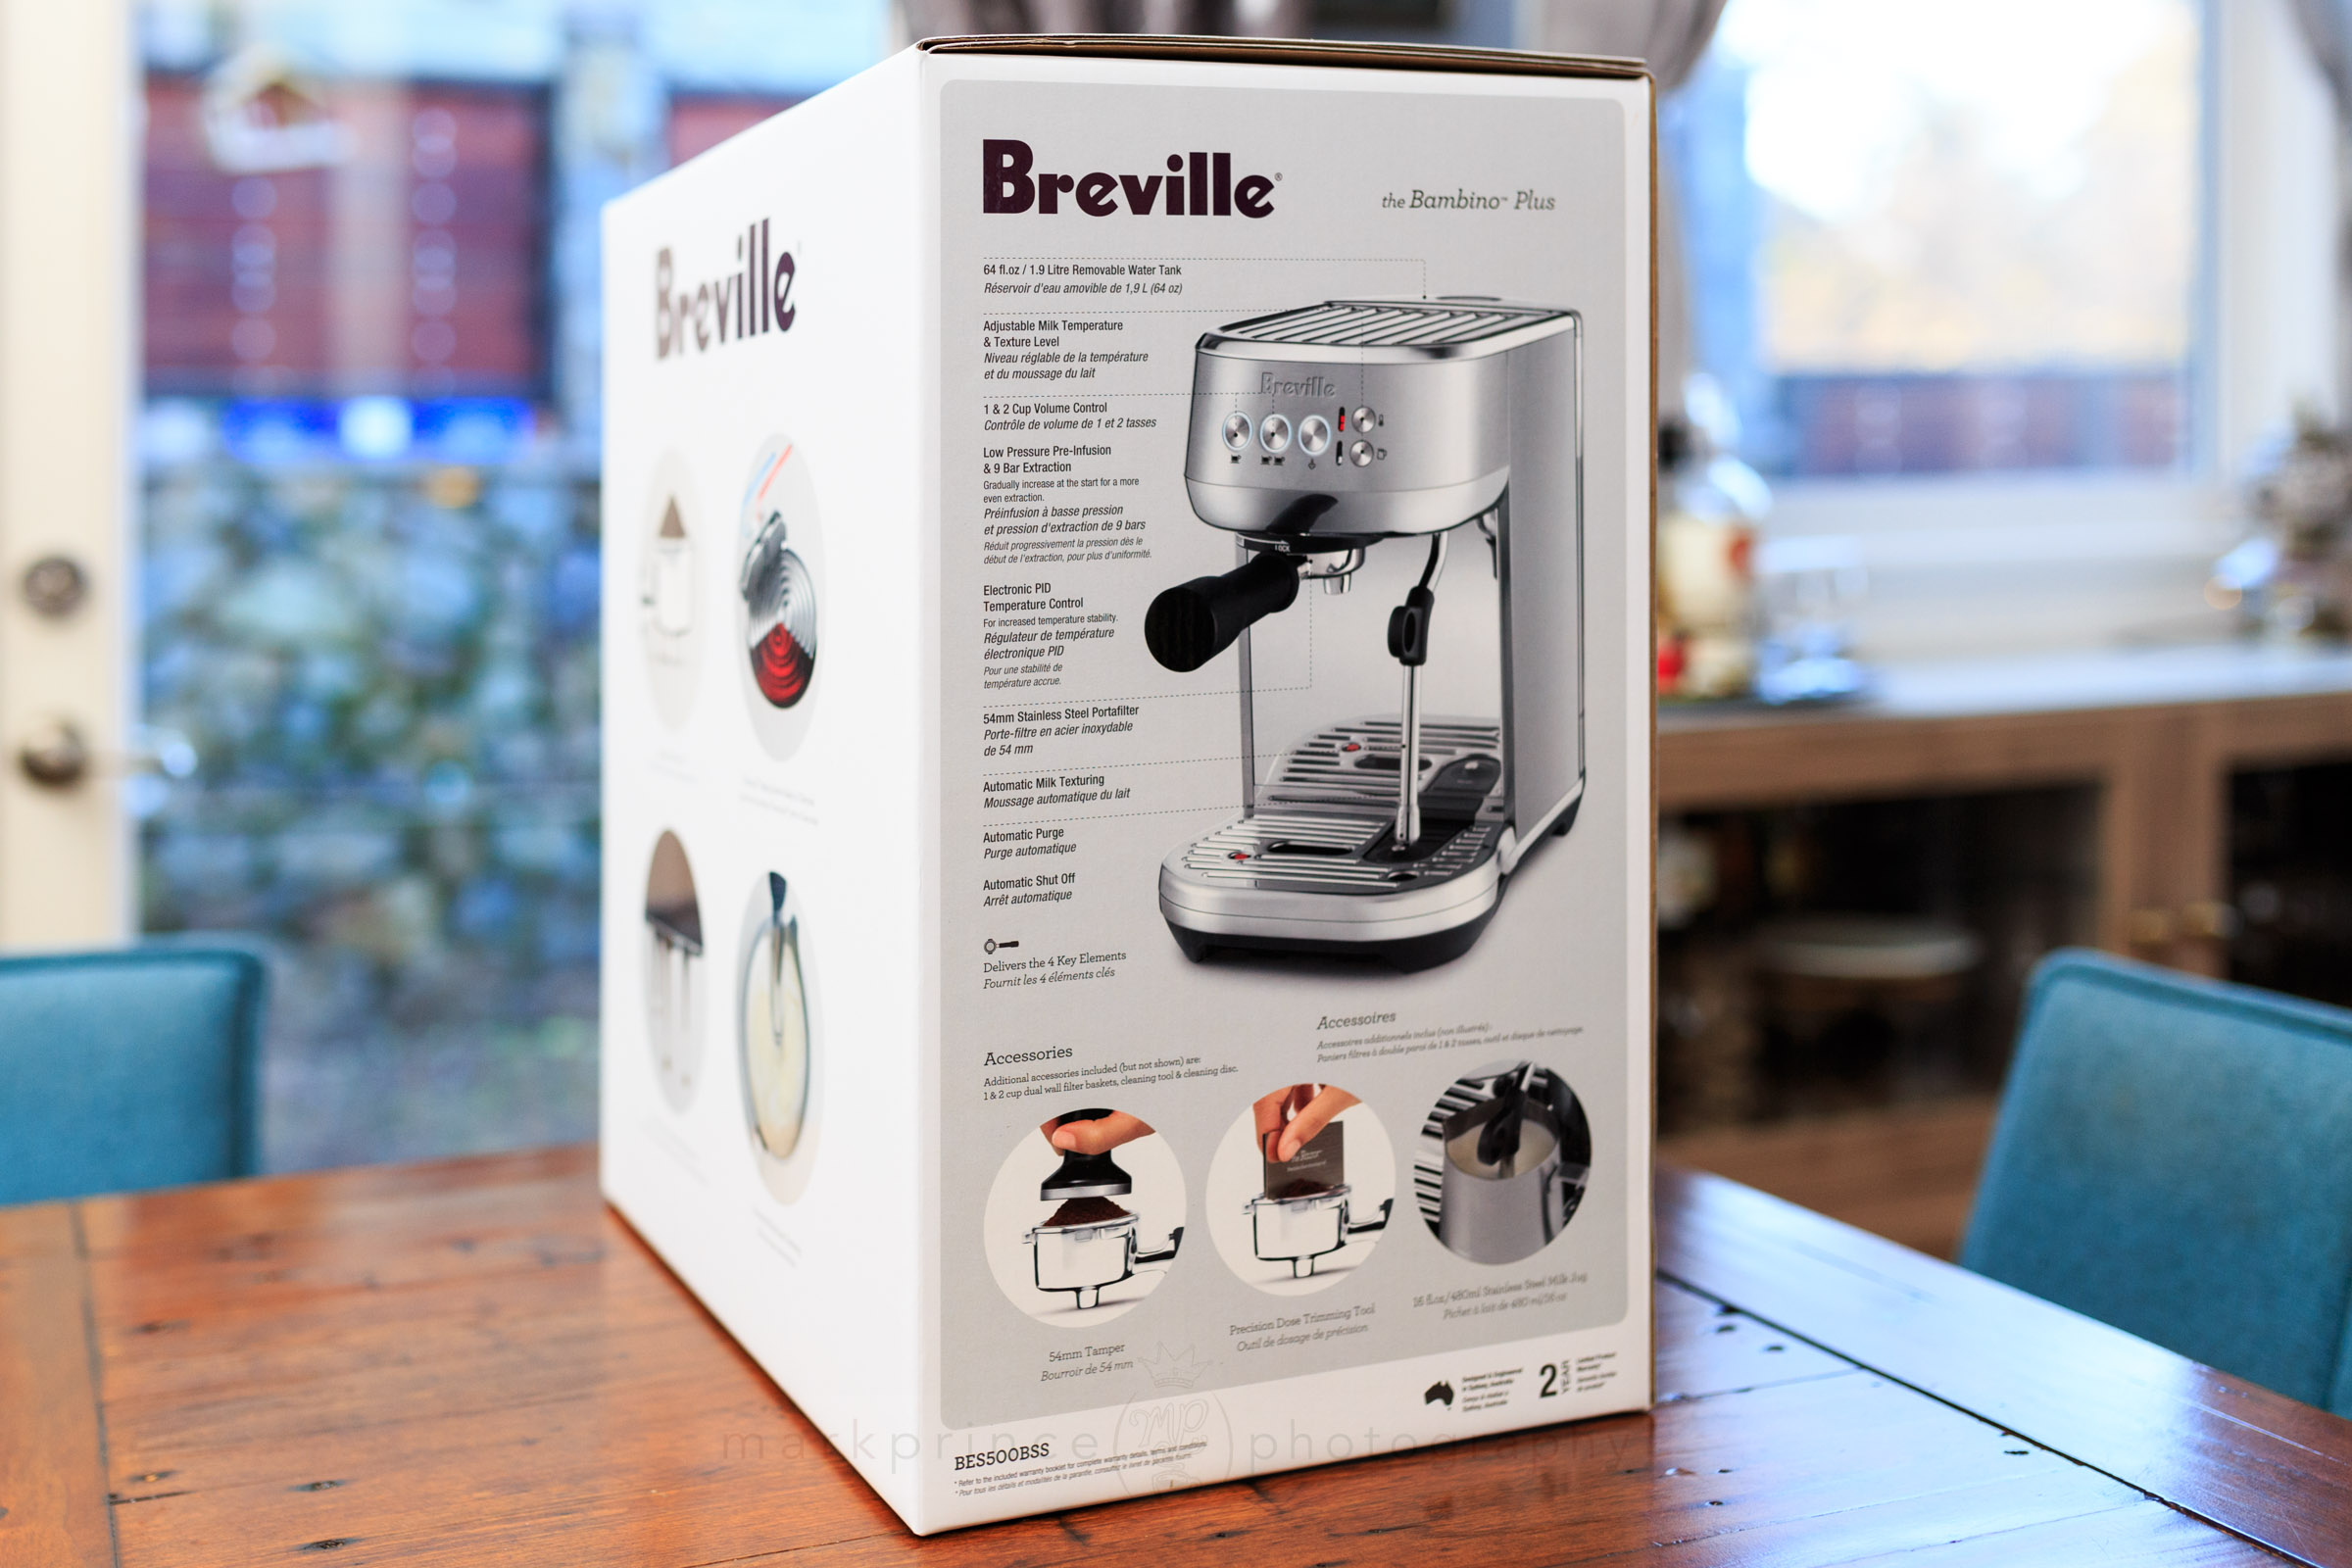 Here's my breville setup. I managed to pick up a bambino plus for